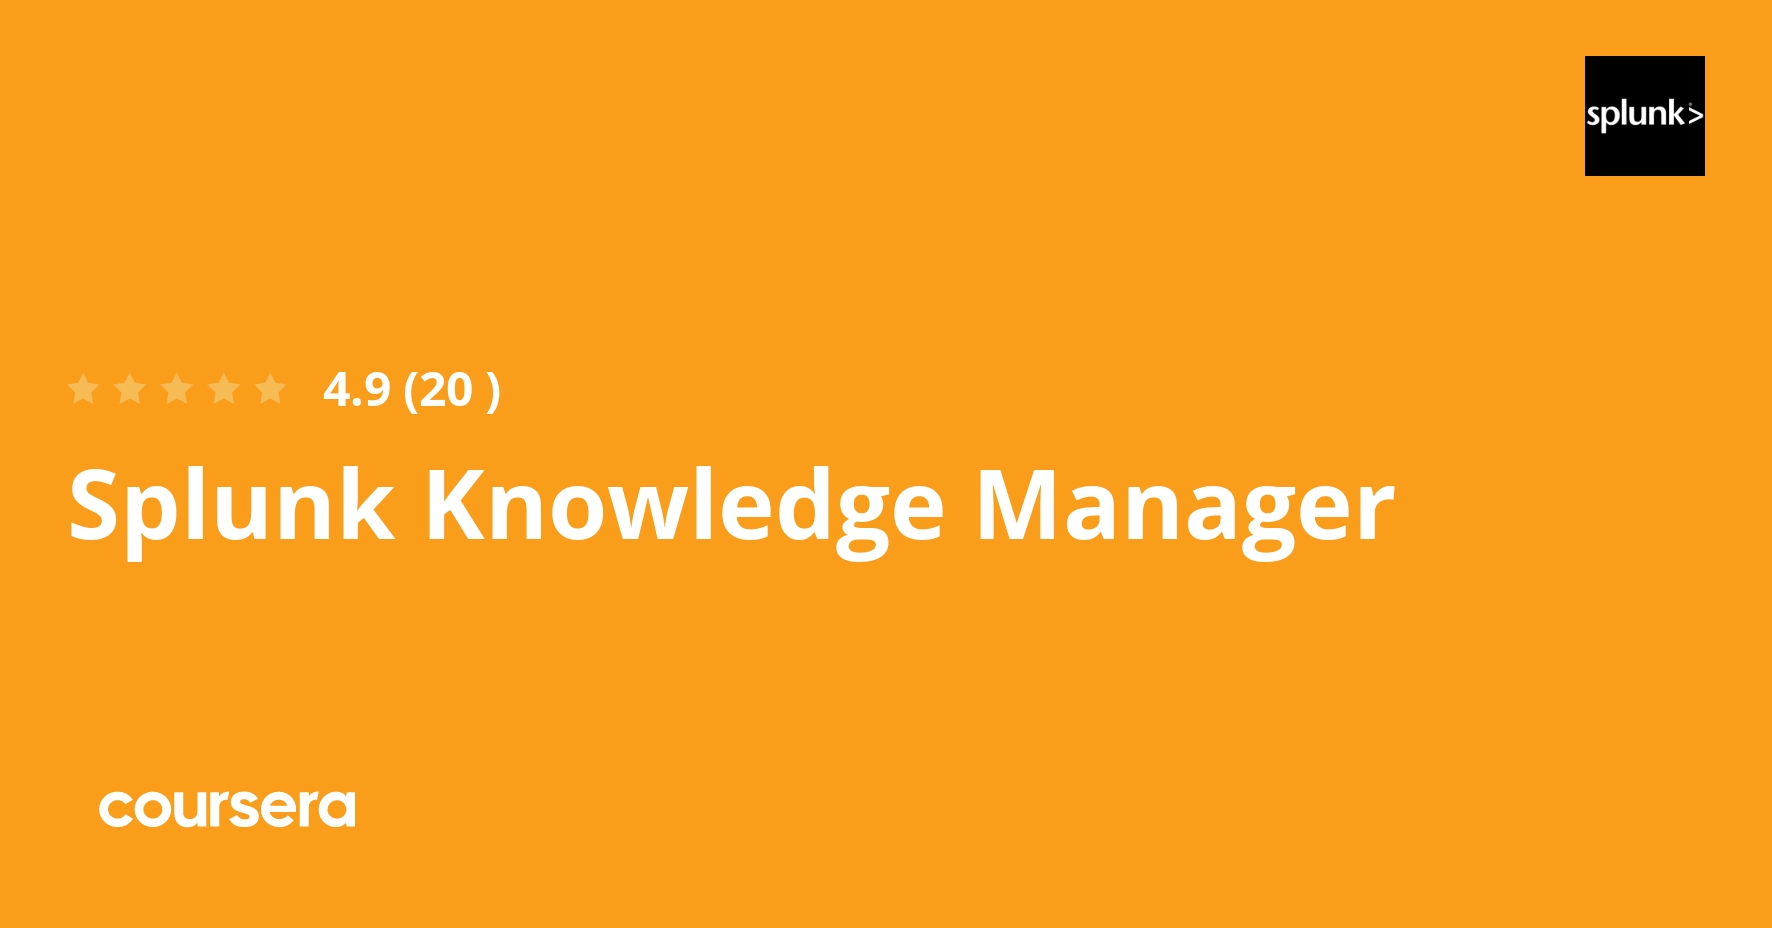 splunk-knowledge-manager